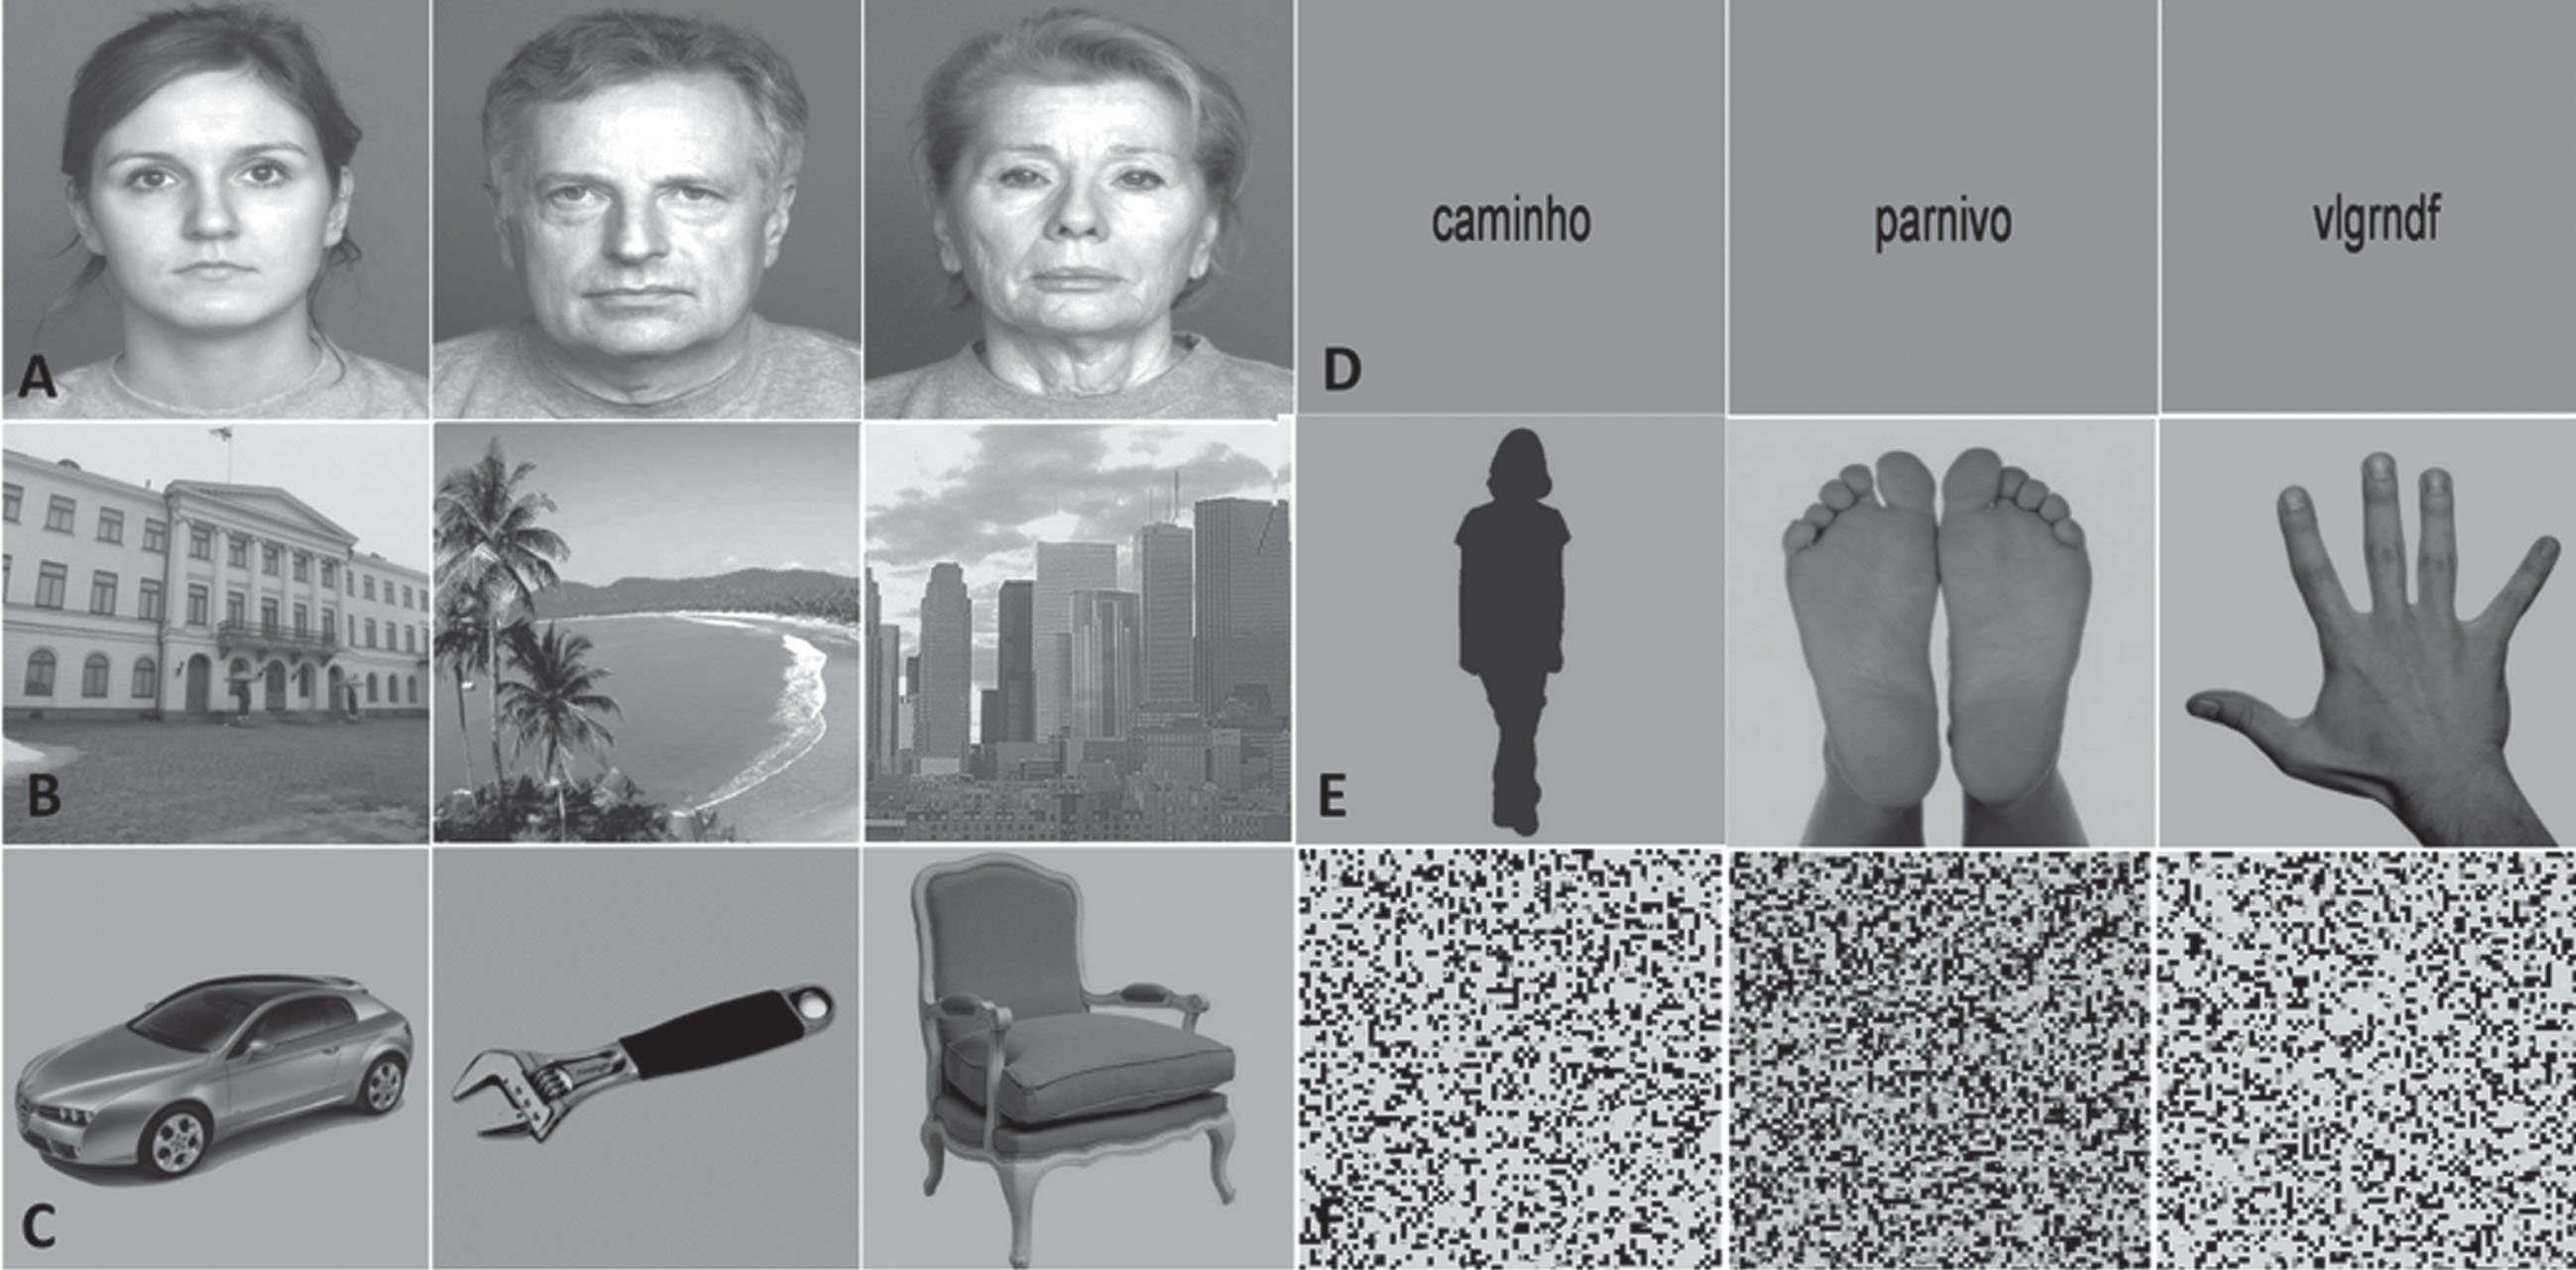 Example of the images presented in the n-back functional task. Left to right: A) young, middle, and old faces; B) buildings, landscapes, and skylines; C) cars, tools, and chairs; D) words, pseudowords, and nonwords; E) body shape silhouettes and hands & feet; F) scrambled stimuli.